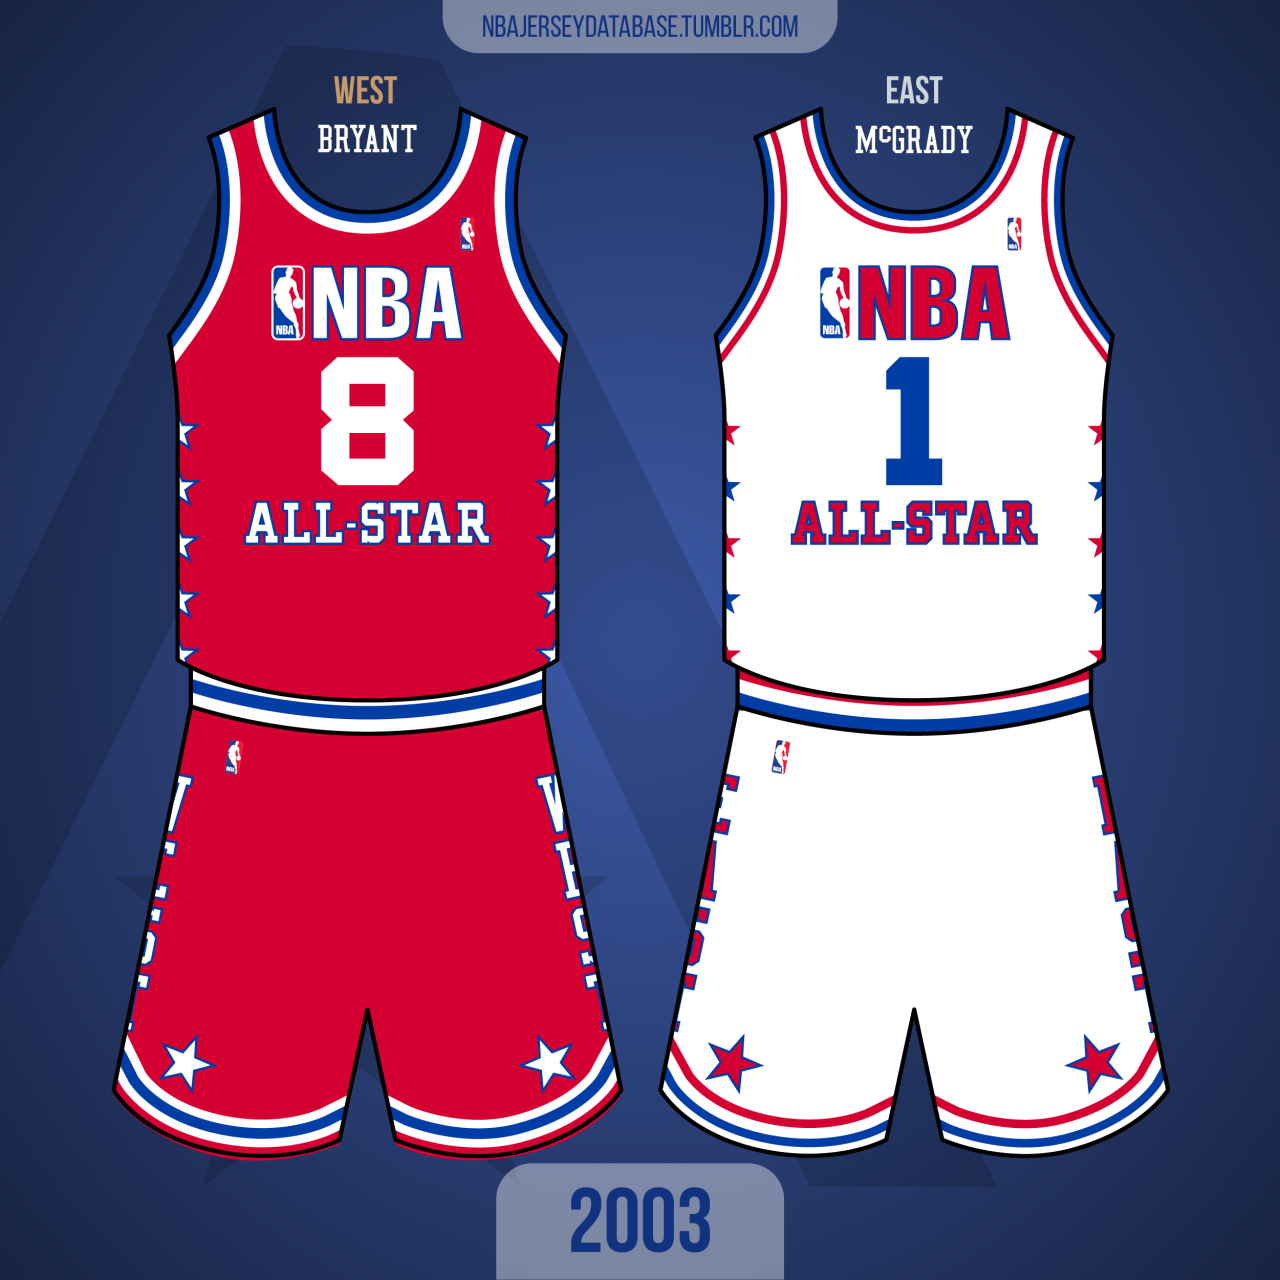 NBA Jersey Database, 1986 NBA All-Star Game Reunion Arena East 139